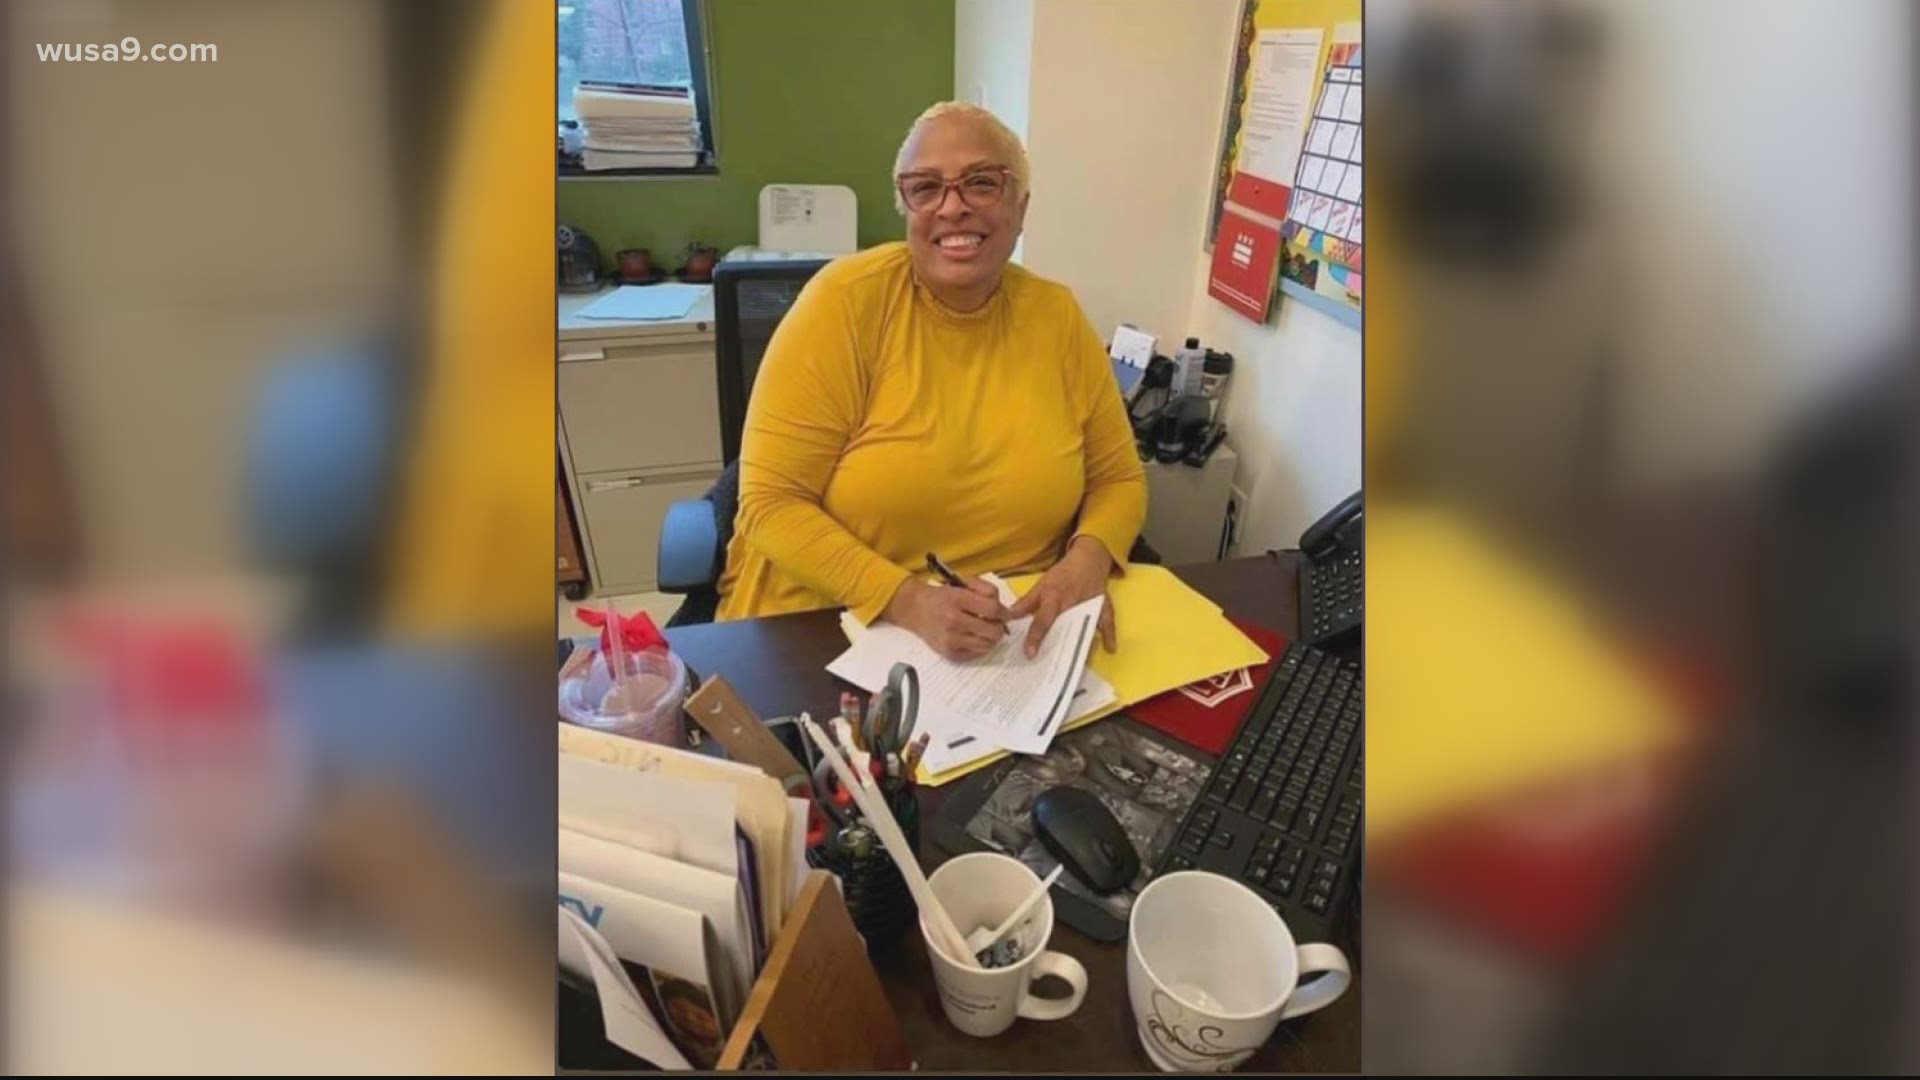 It remains unclear how or where Ballou Stay Opportunity Academy teacher Helen Marie White contracted COVID-19.